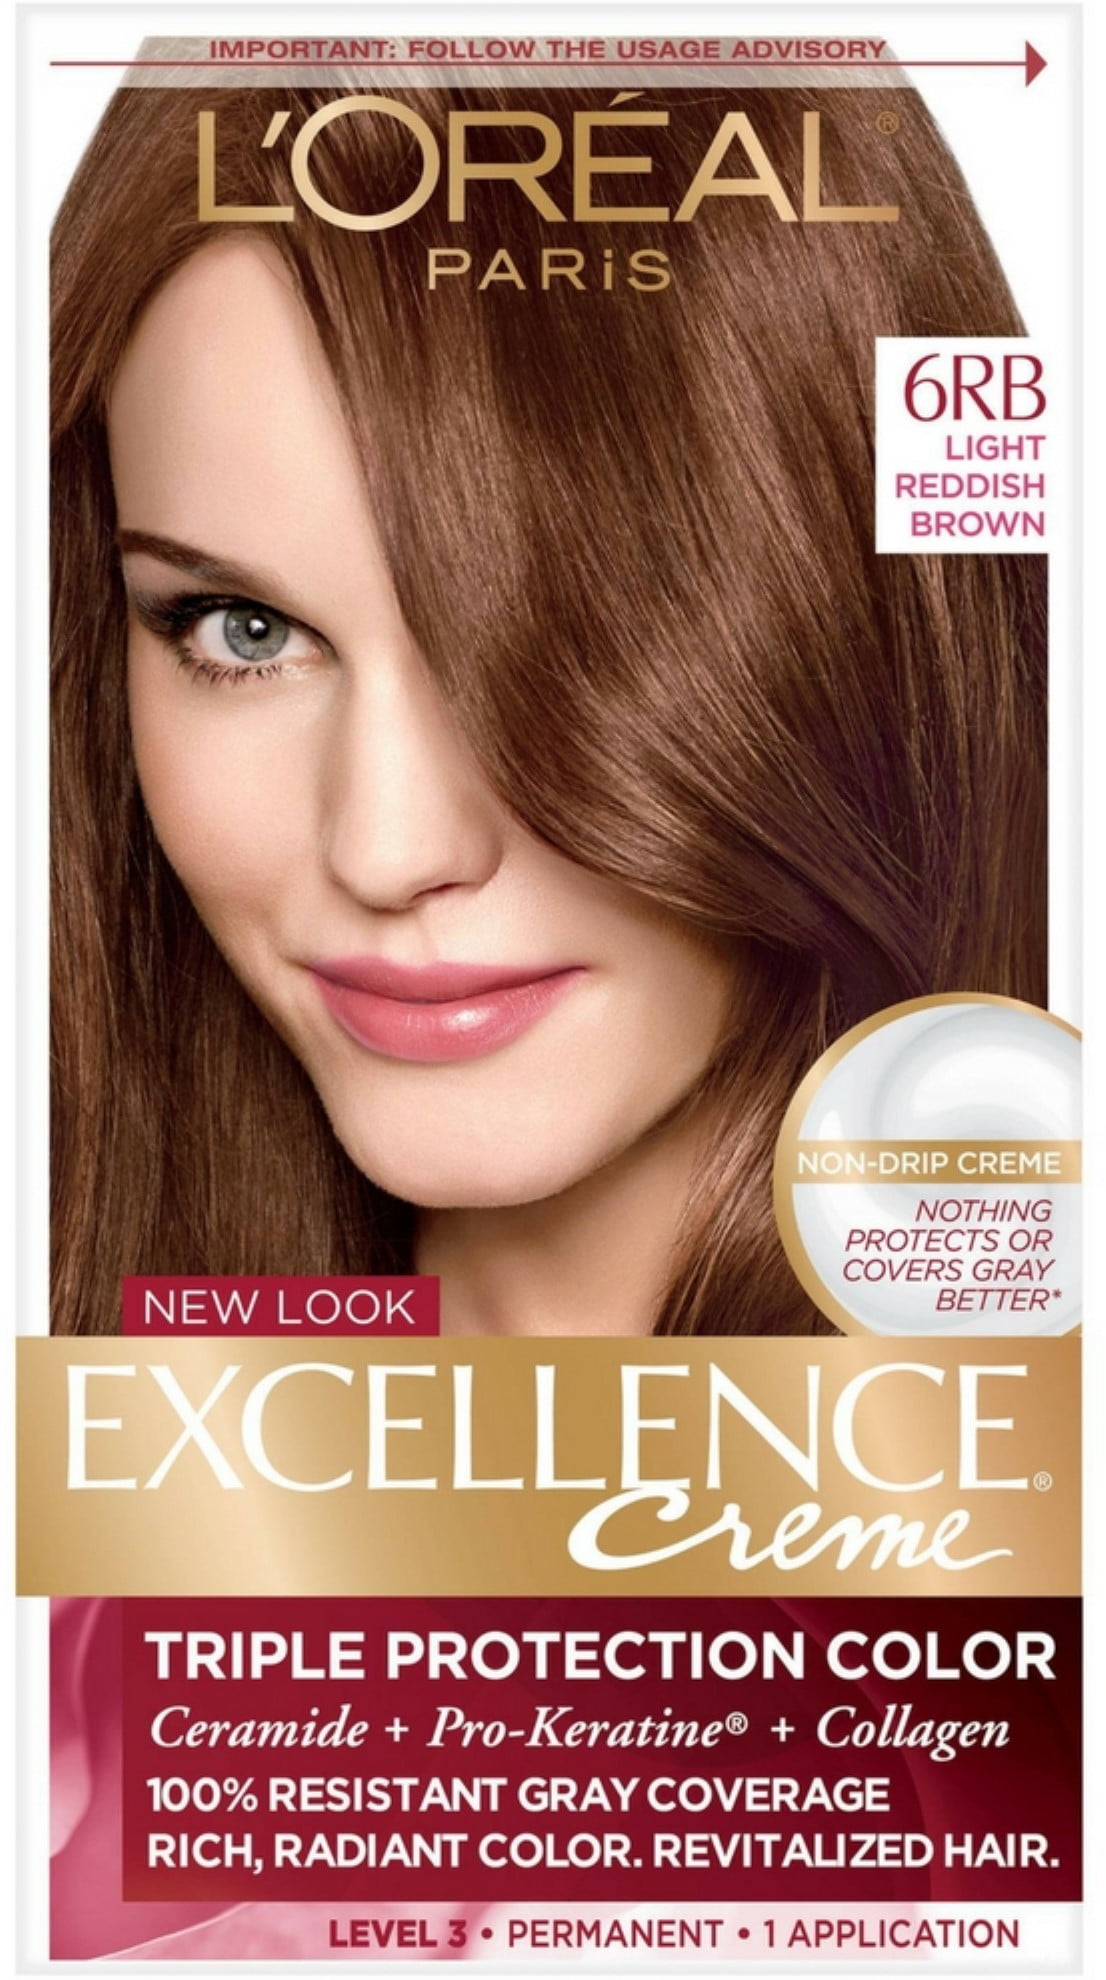 L'Oreal Excellence Creme Triple Protection Hair Color, Light Reddish